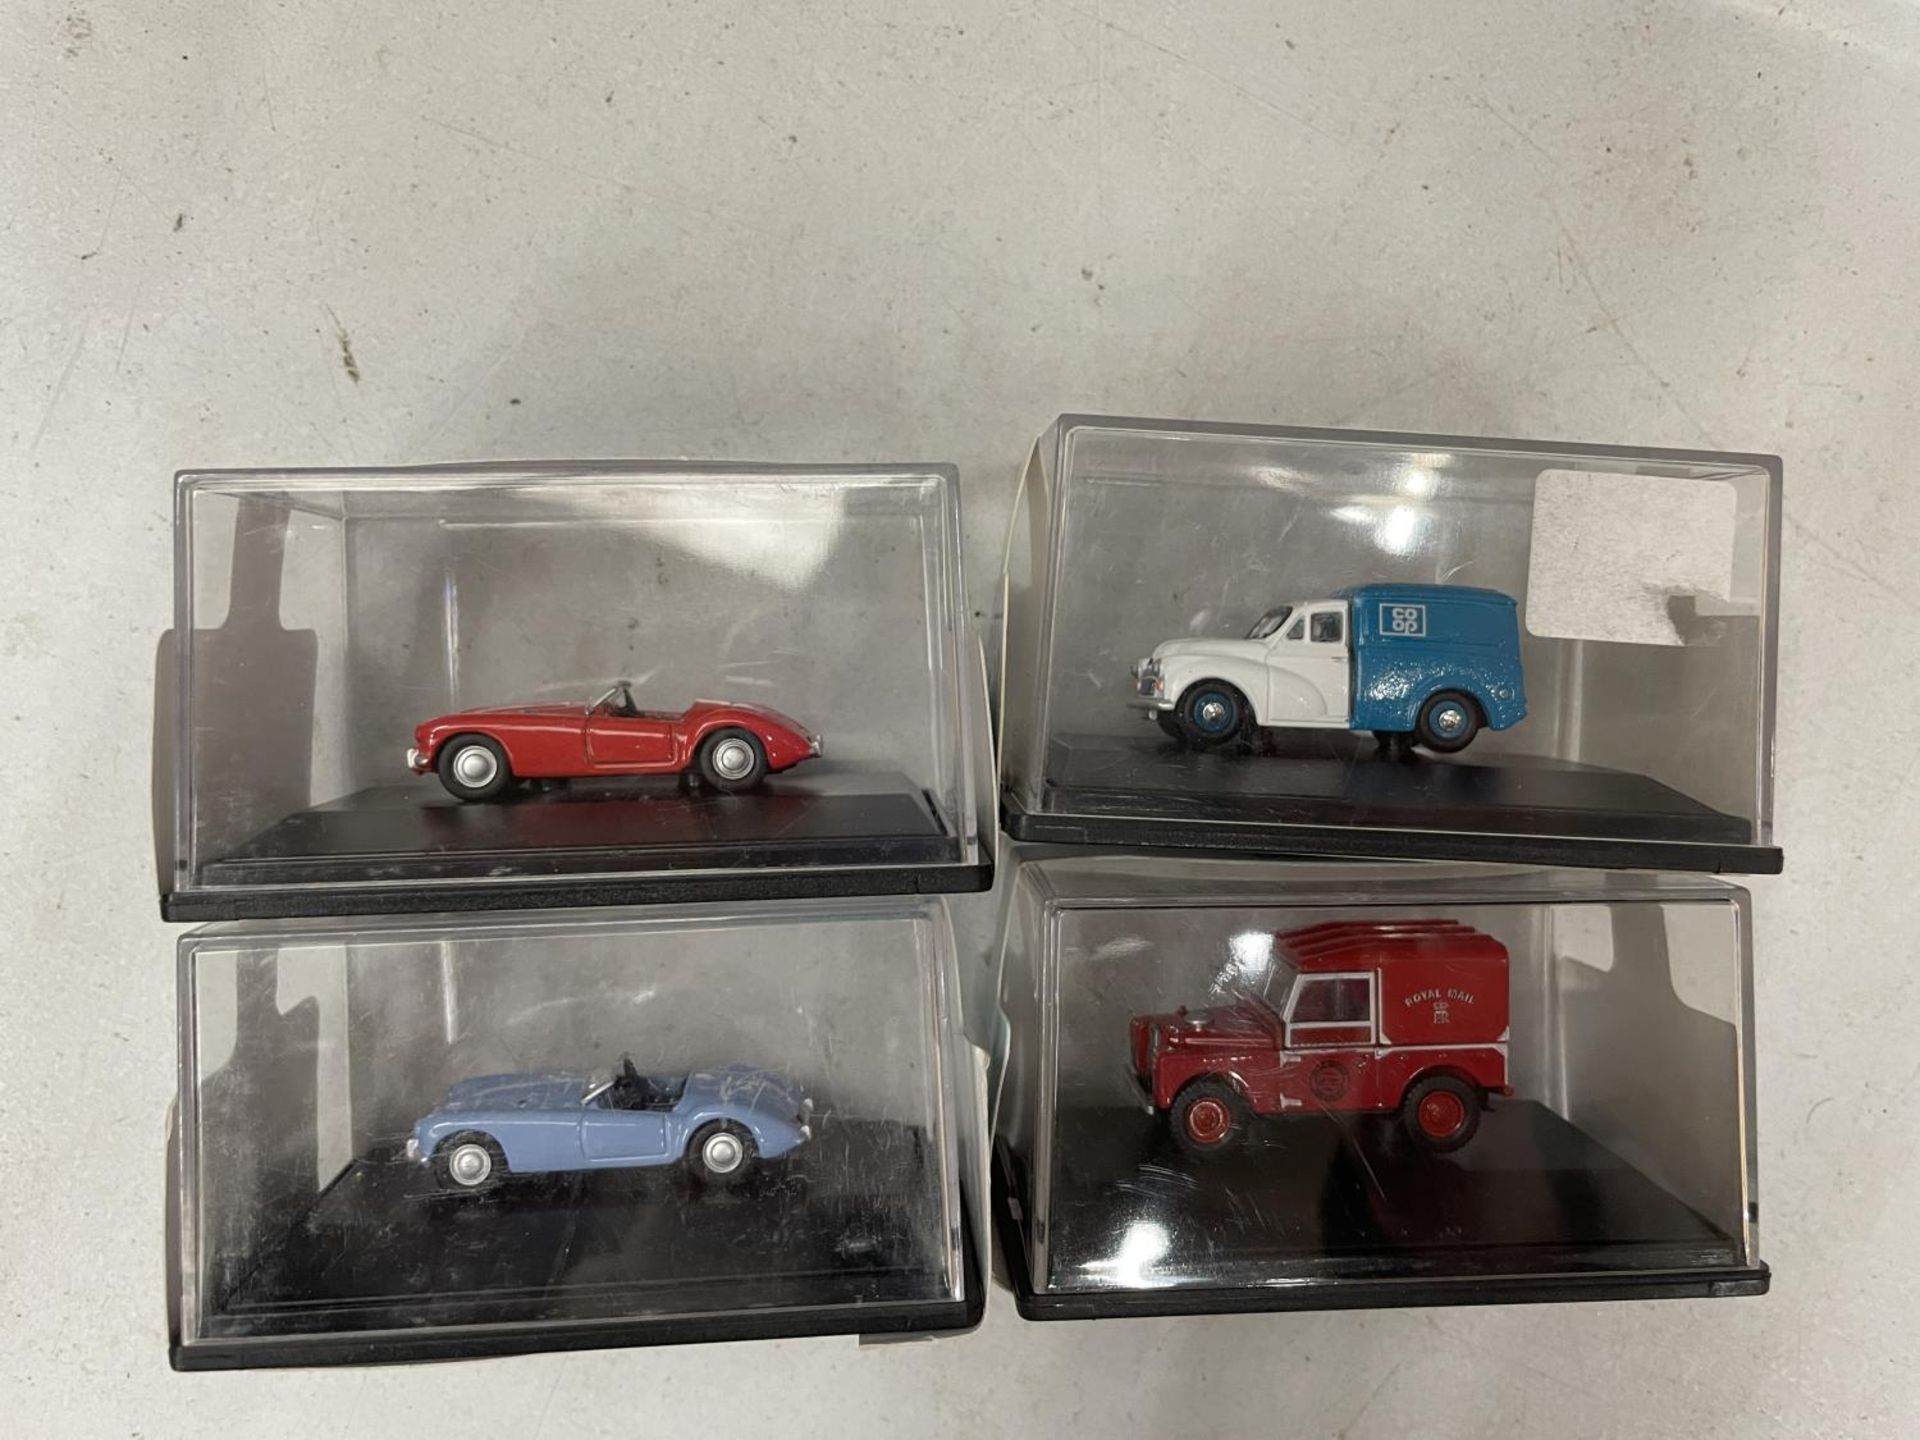 TEN BOXED OXFORD RAILWAY VEHICLES 1:76 SCALE - Image 2 of 4